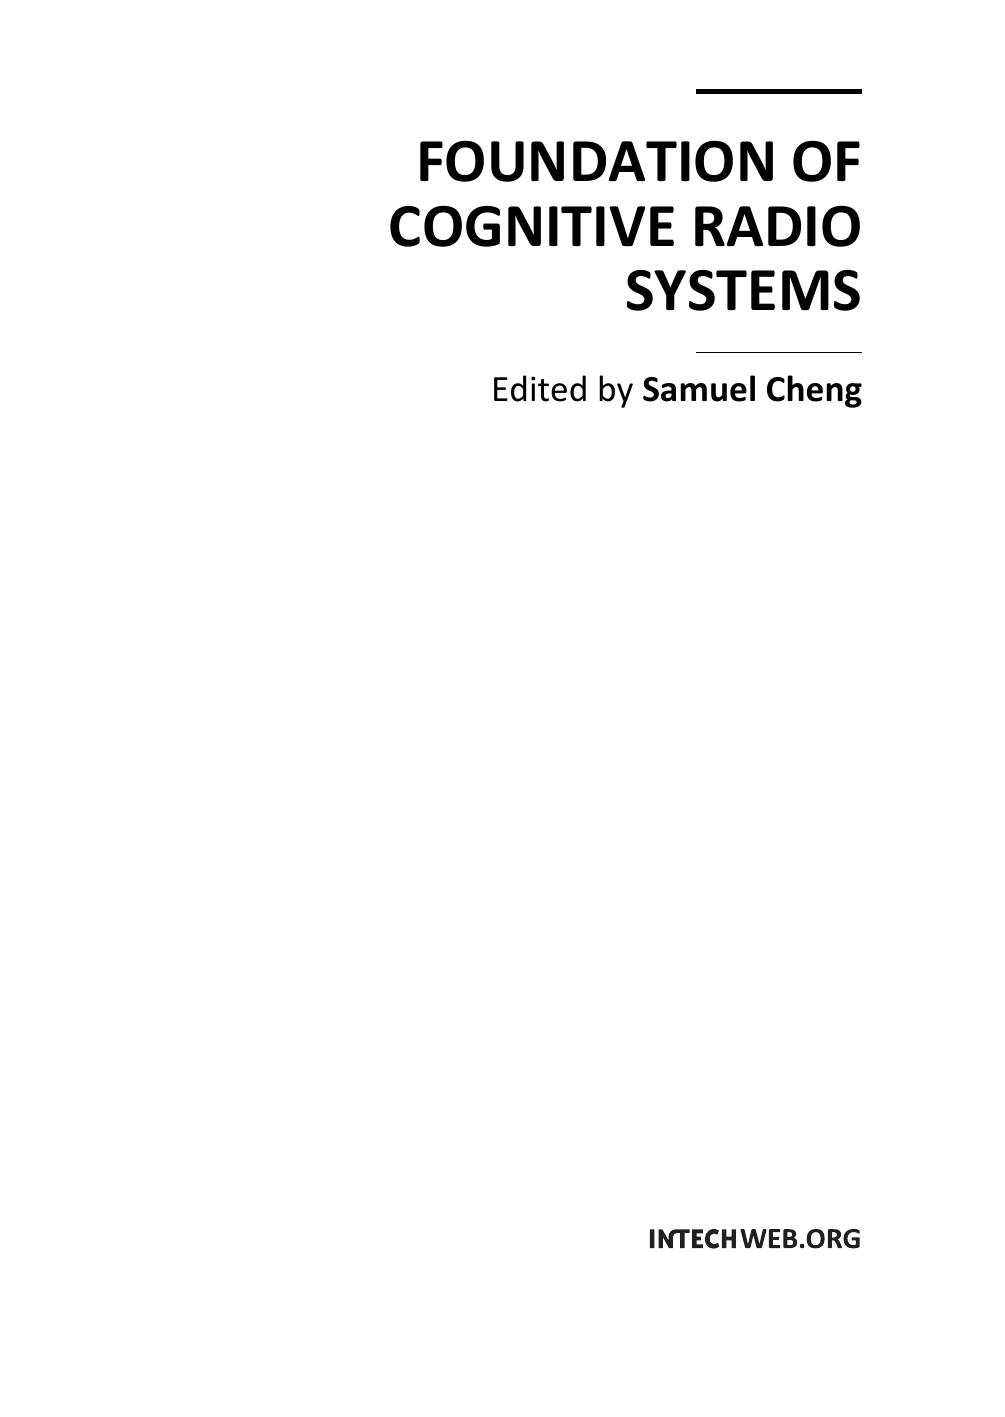 Foundation of Cognitive Radio Systems 2012.pdf